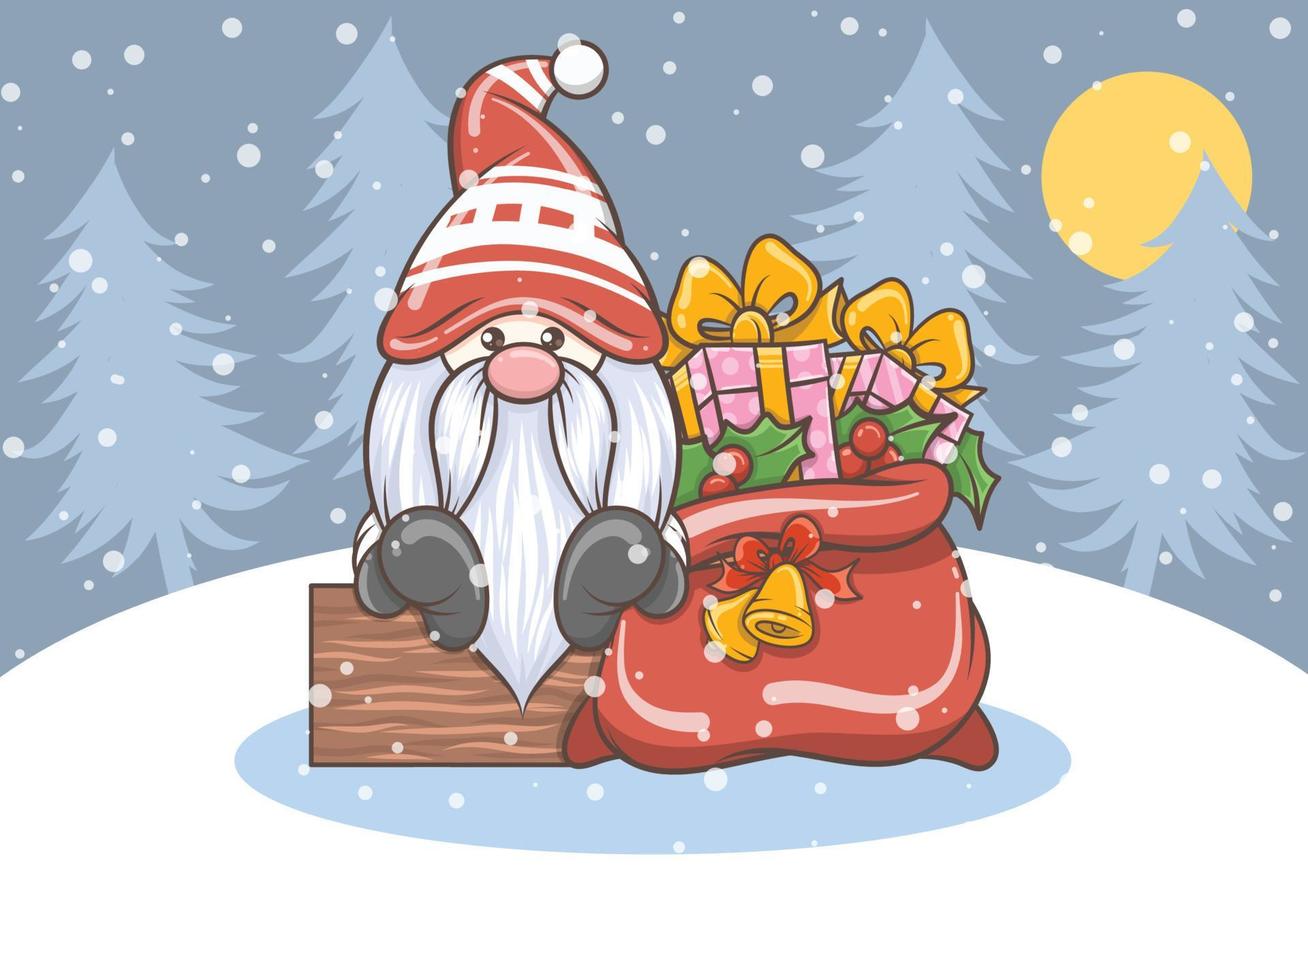 cute gnome illustration with Christmas gift bag vector